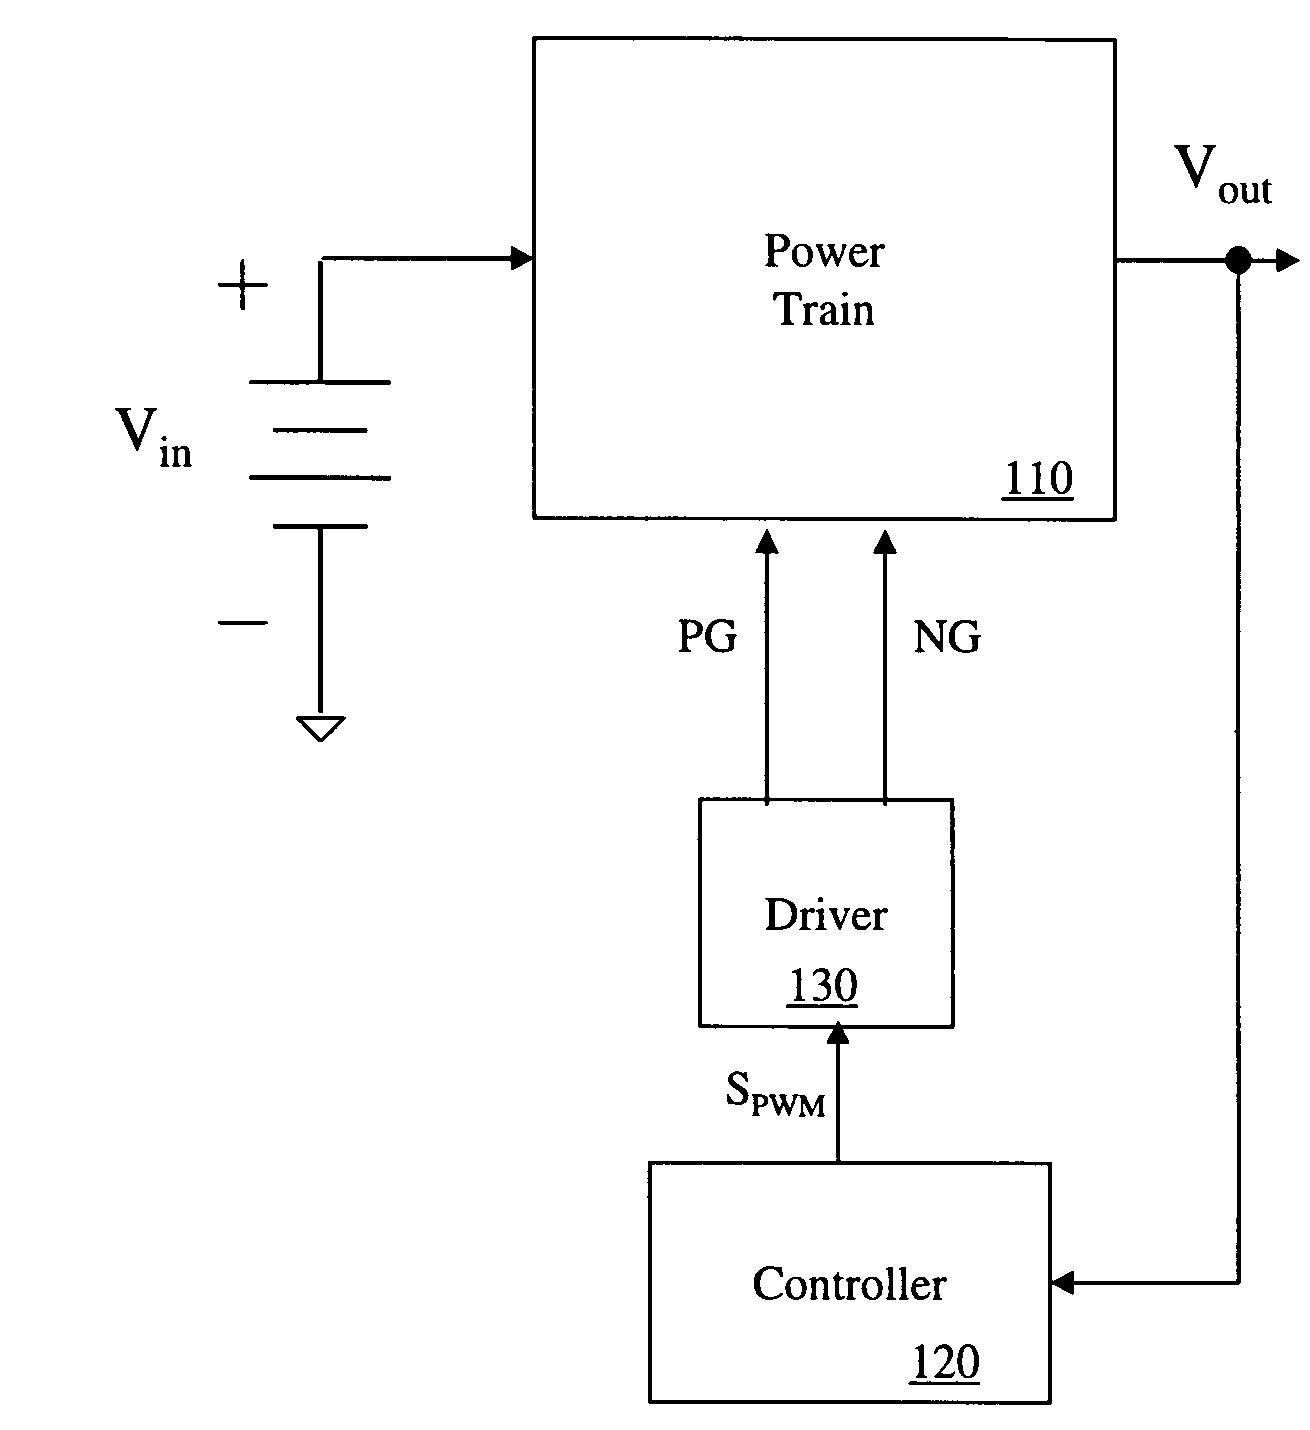 Power Converter Employing a Micromagnetic Device